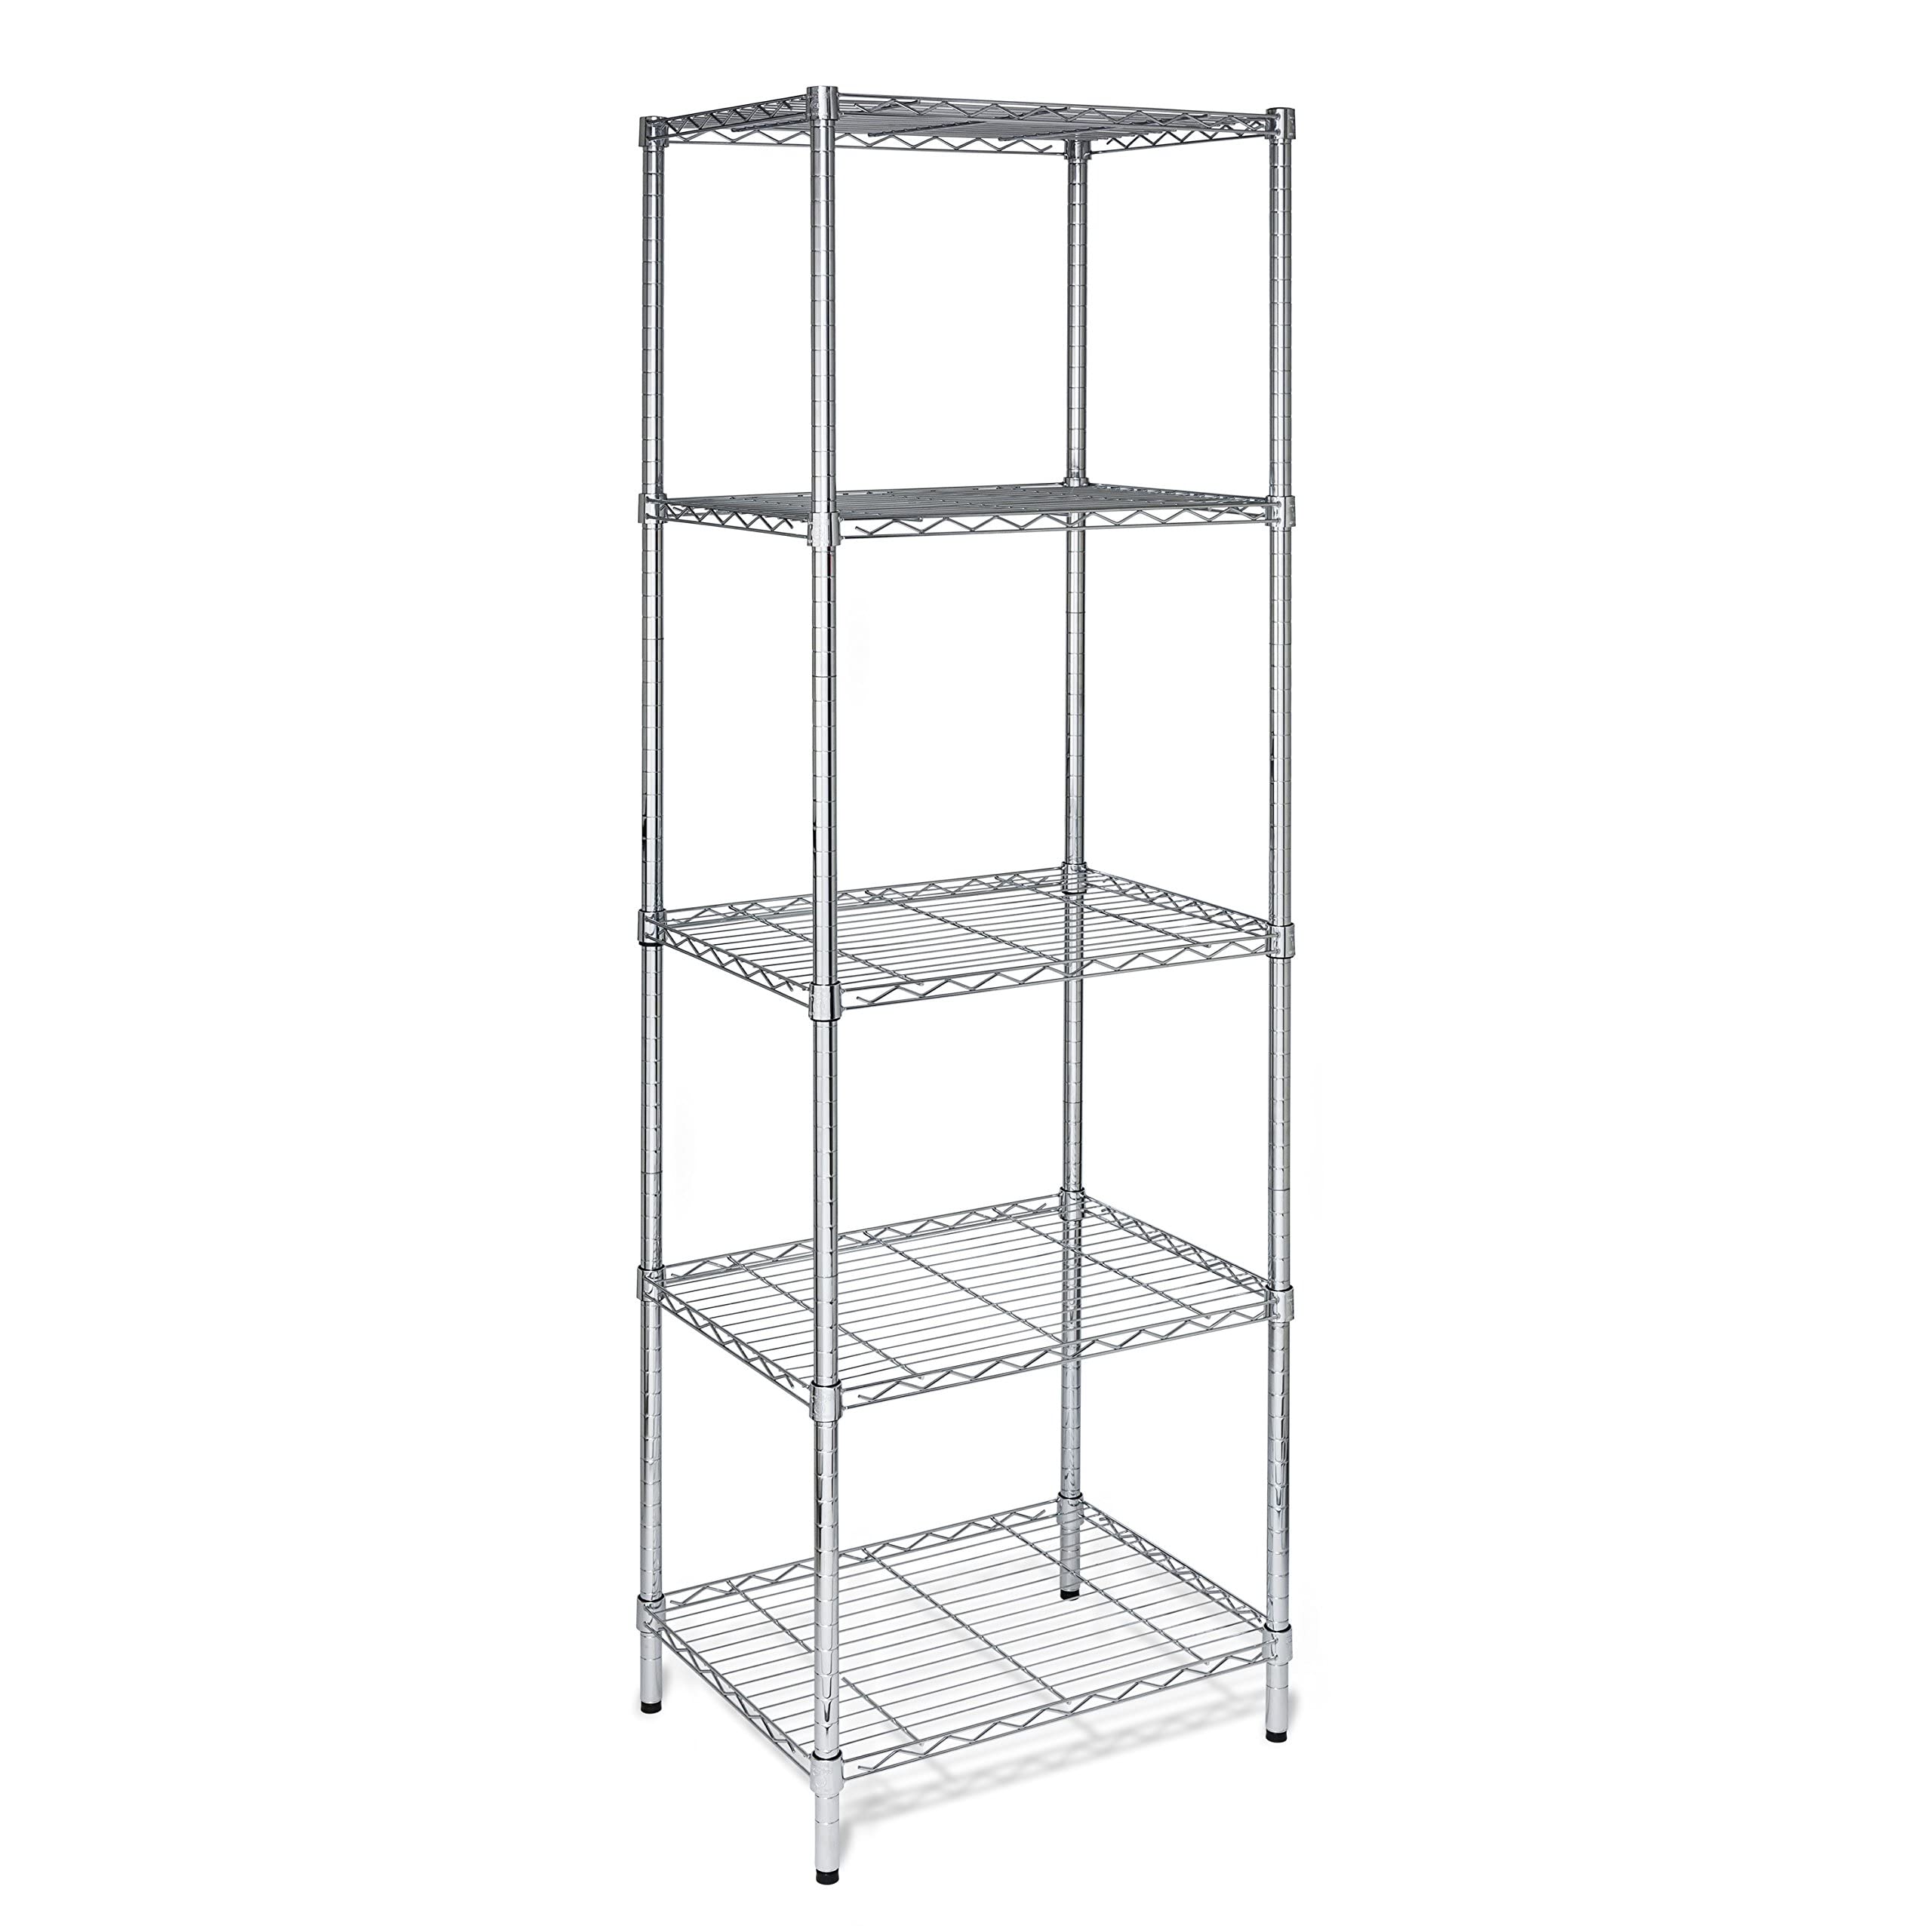 Prime Members: Honey-Can-Do 5-Tier Adjustable Shelving Unit (Various Sizes & Capacity & Finish) from $46.99 + Free Shipping